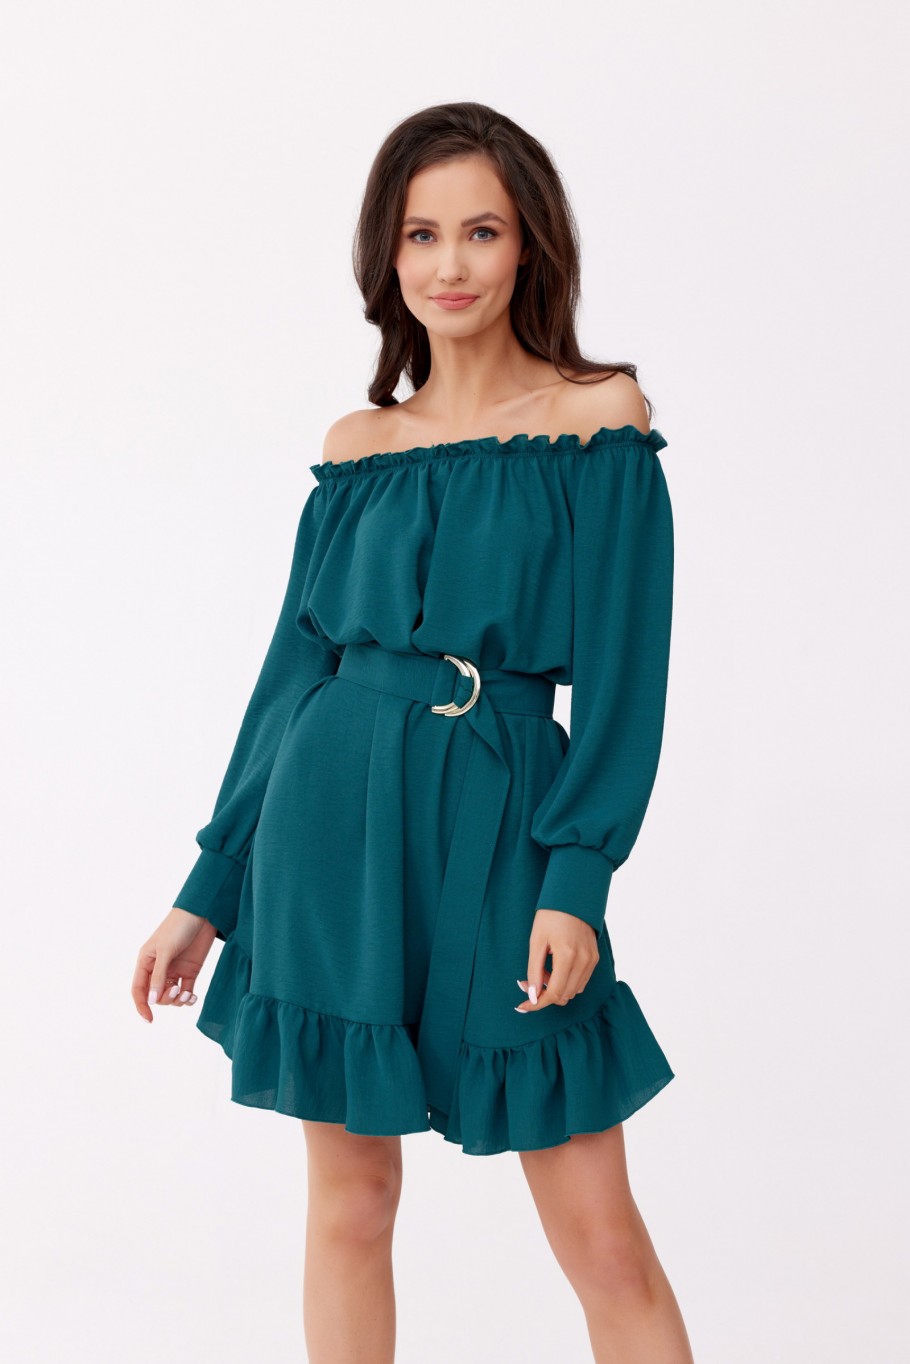 Cindy - off-the-shoulder dress with ruffles and adjustable belt BUT